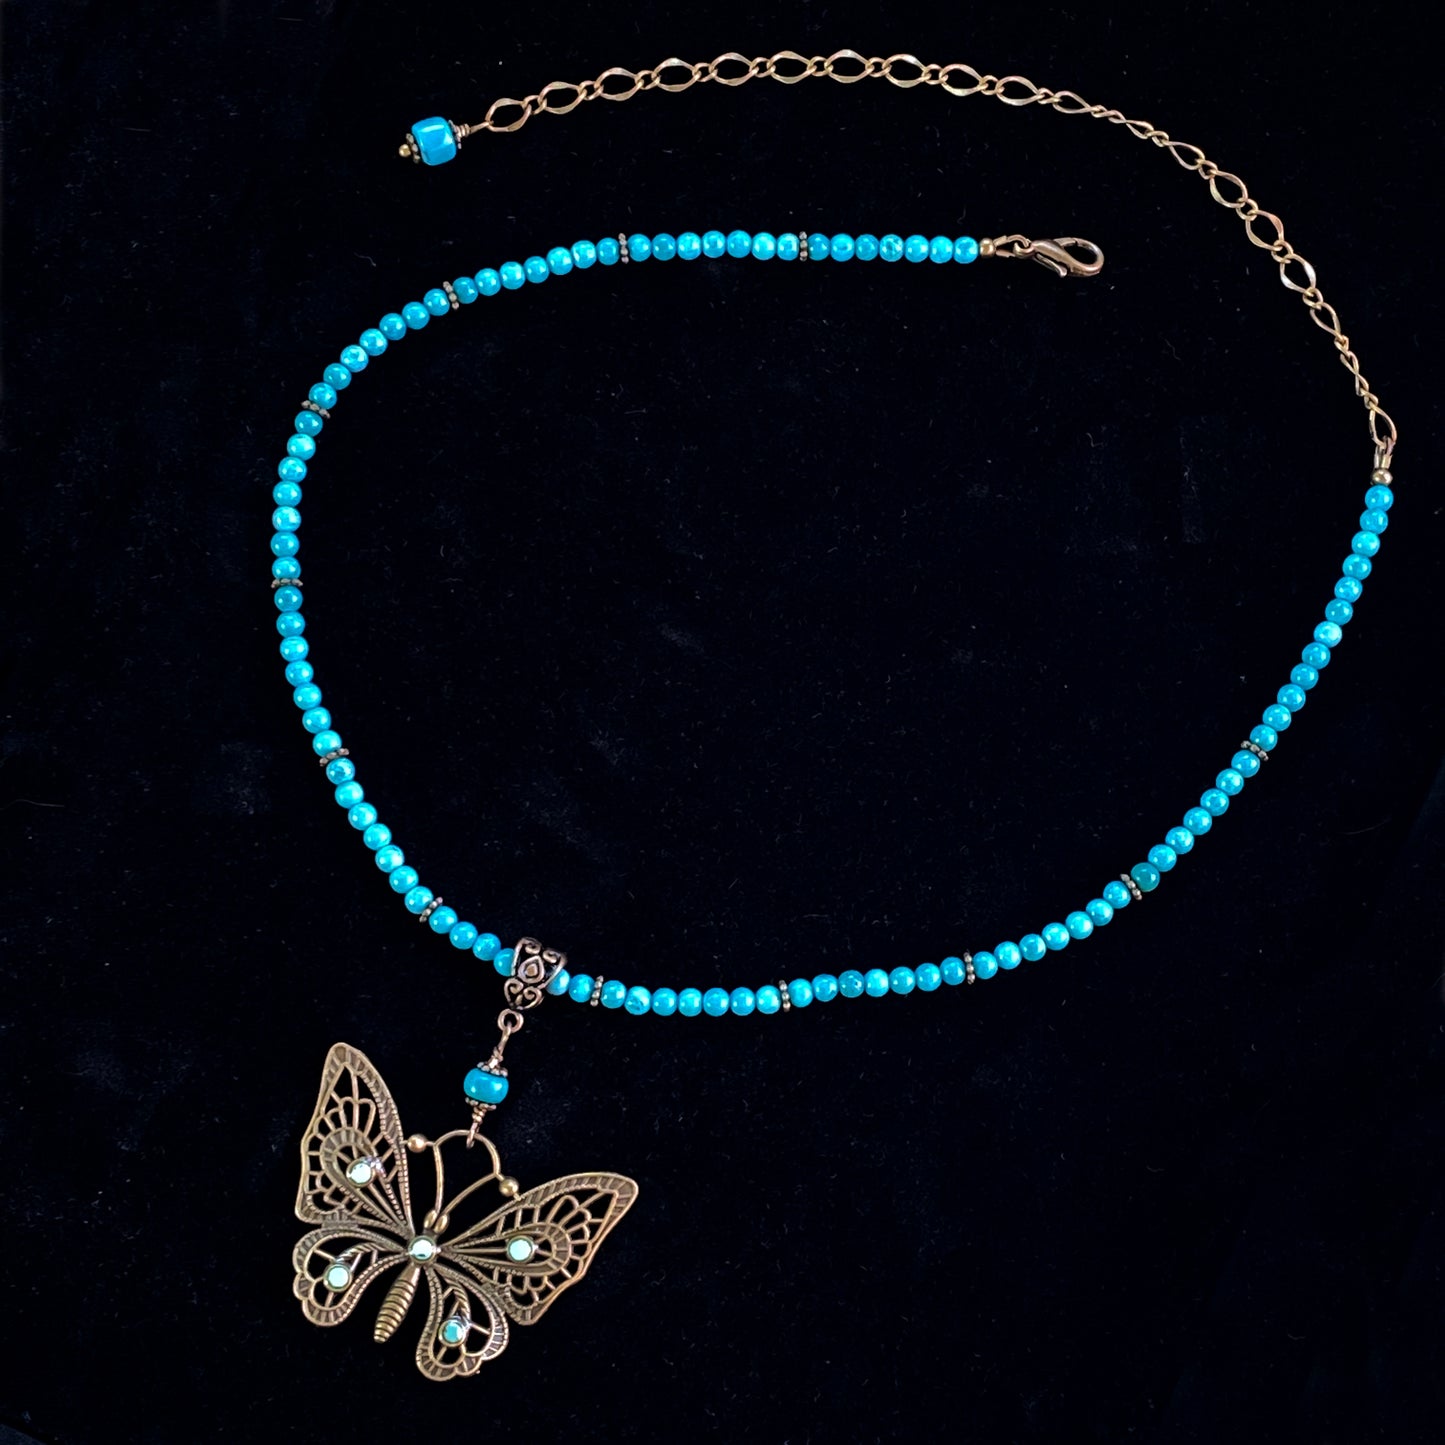 Natural Turquoise gemstone  and Brass Butterfly pendant beaded necklace